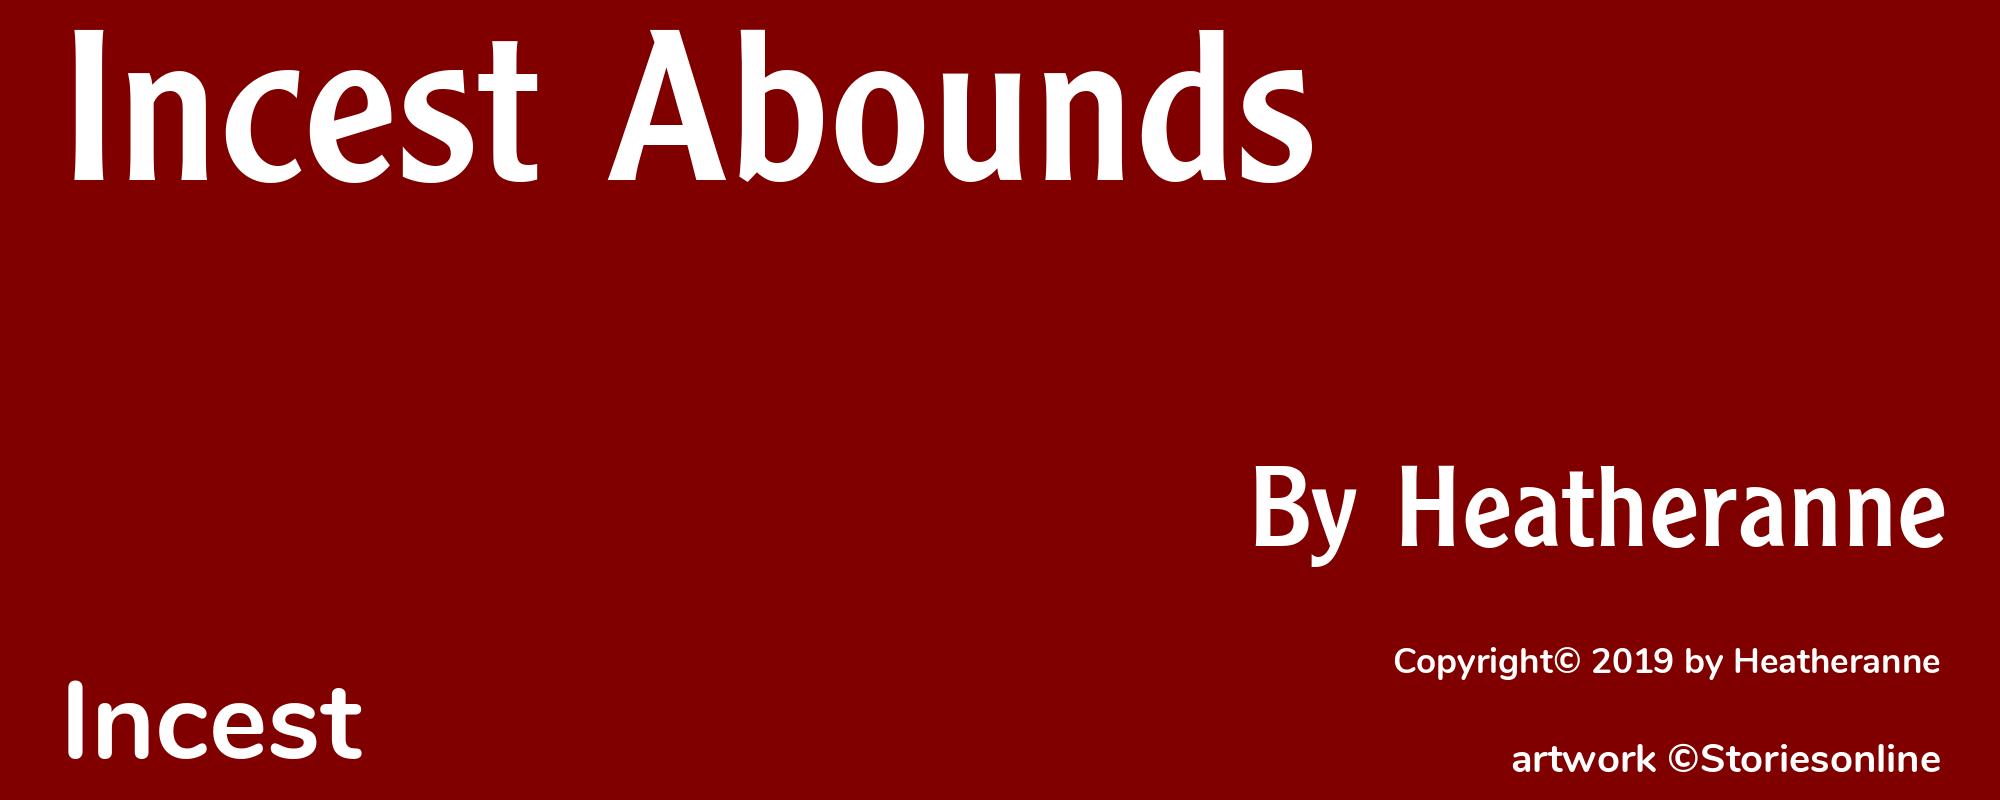 Incest Abounds - Cover